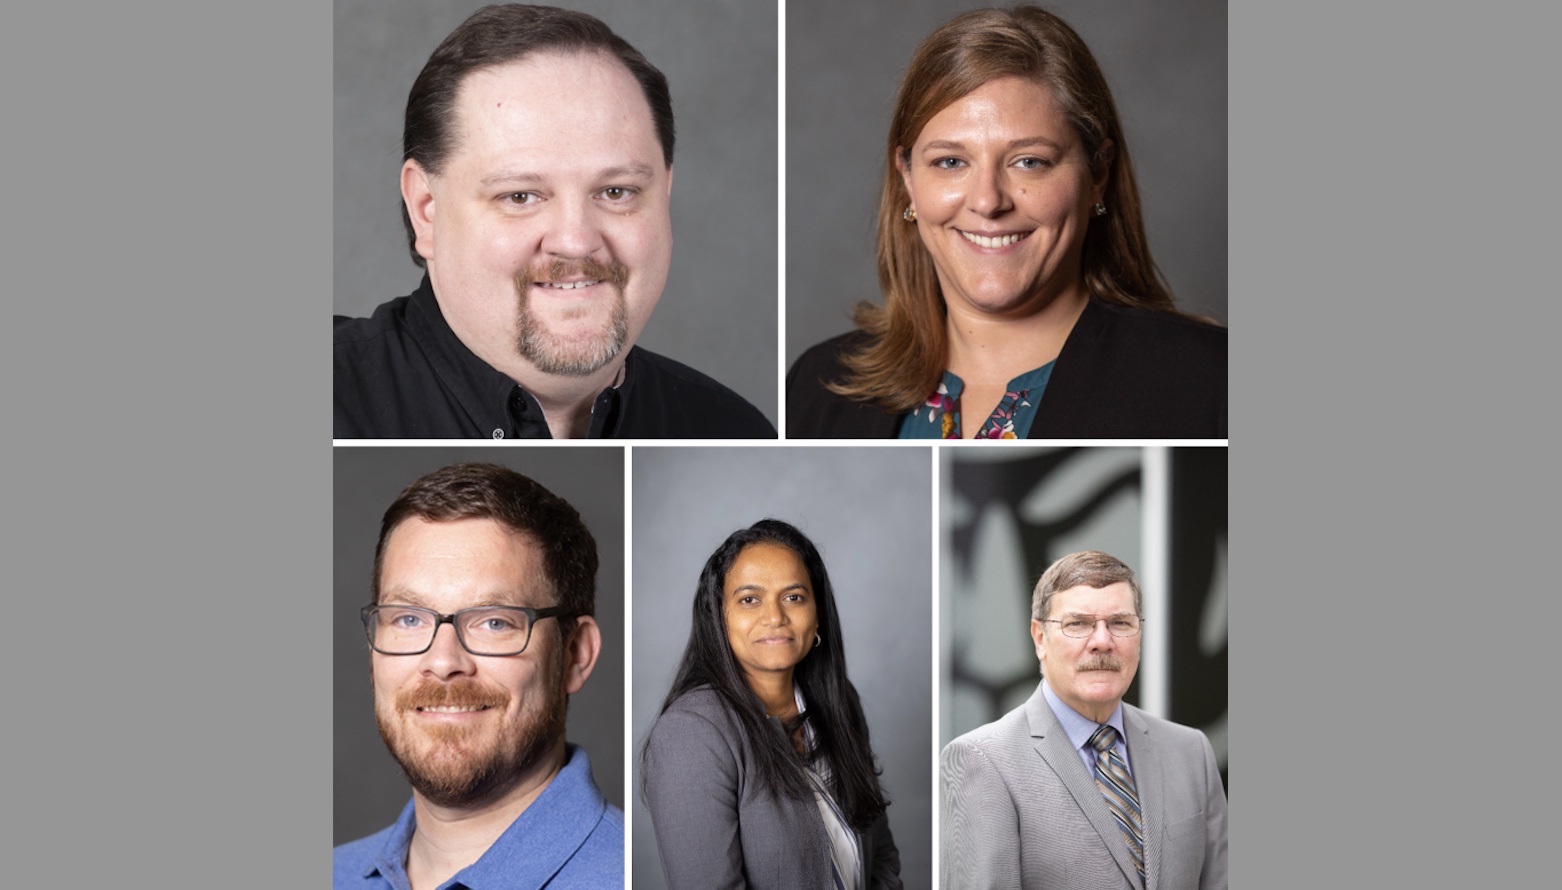 The APSU College of STEM’s newest tenured faculty pictured clockwise from top left: Matthew Anderson, Dr. Catherine Haase, Dr. Erik Haroldson, Dr. Anuradha Pathiranage and Charles Weigandt.